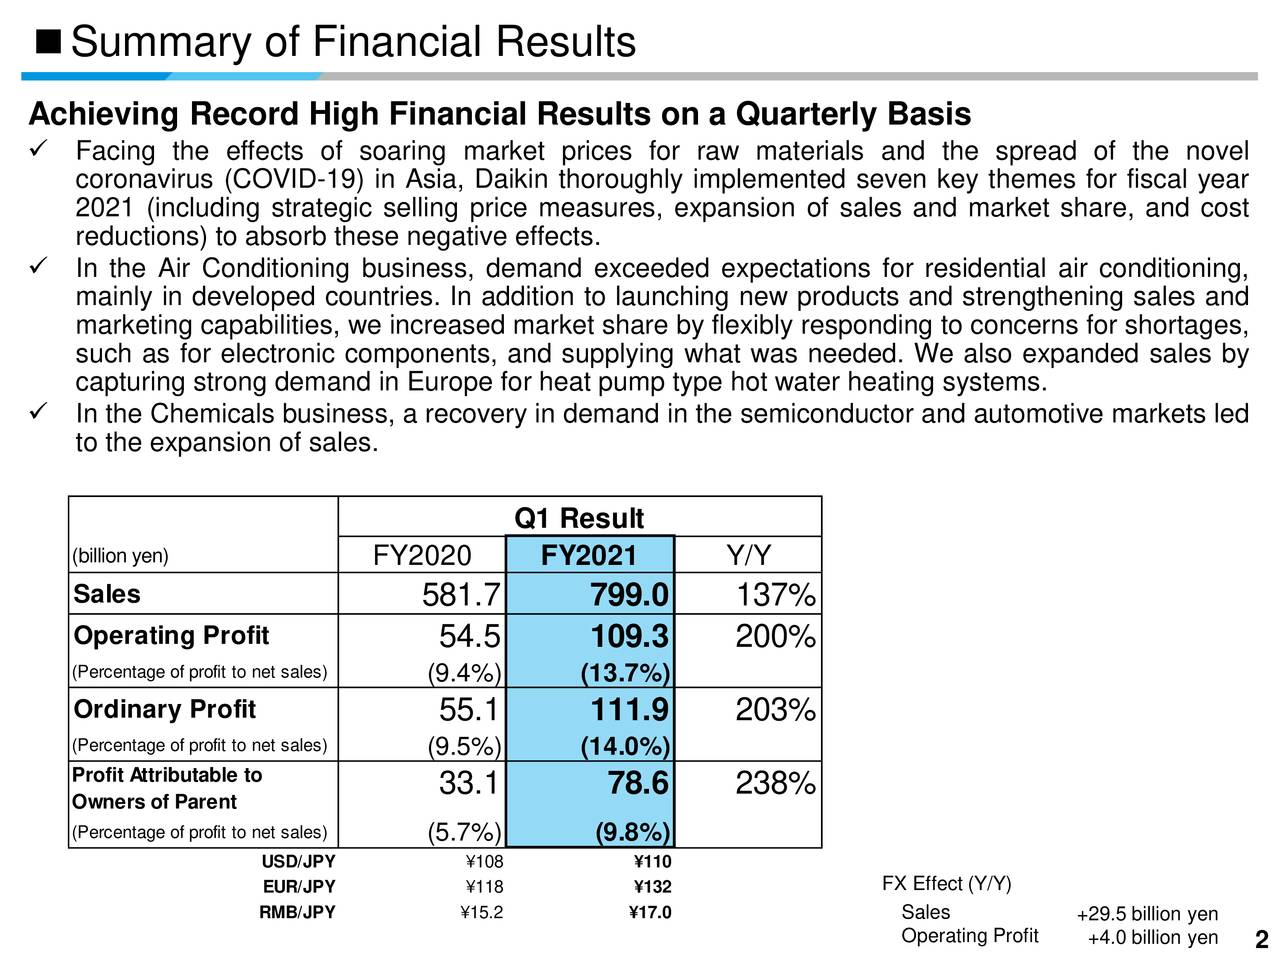 ■Summary of Financial Results